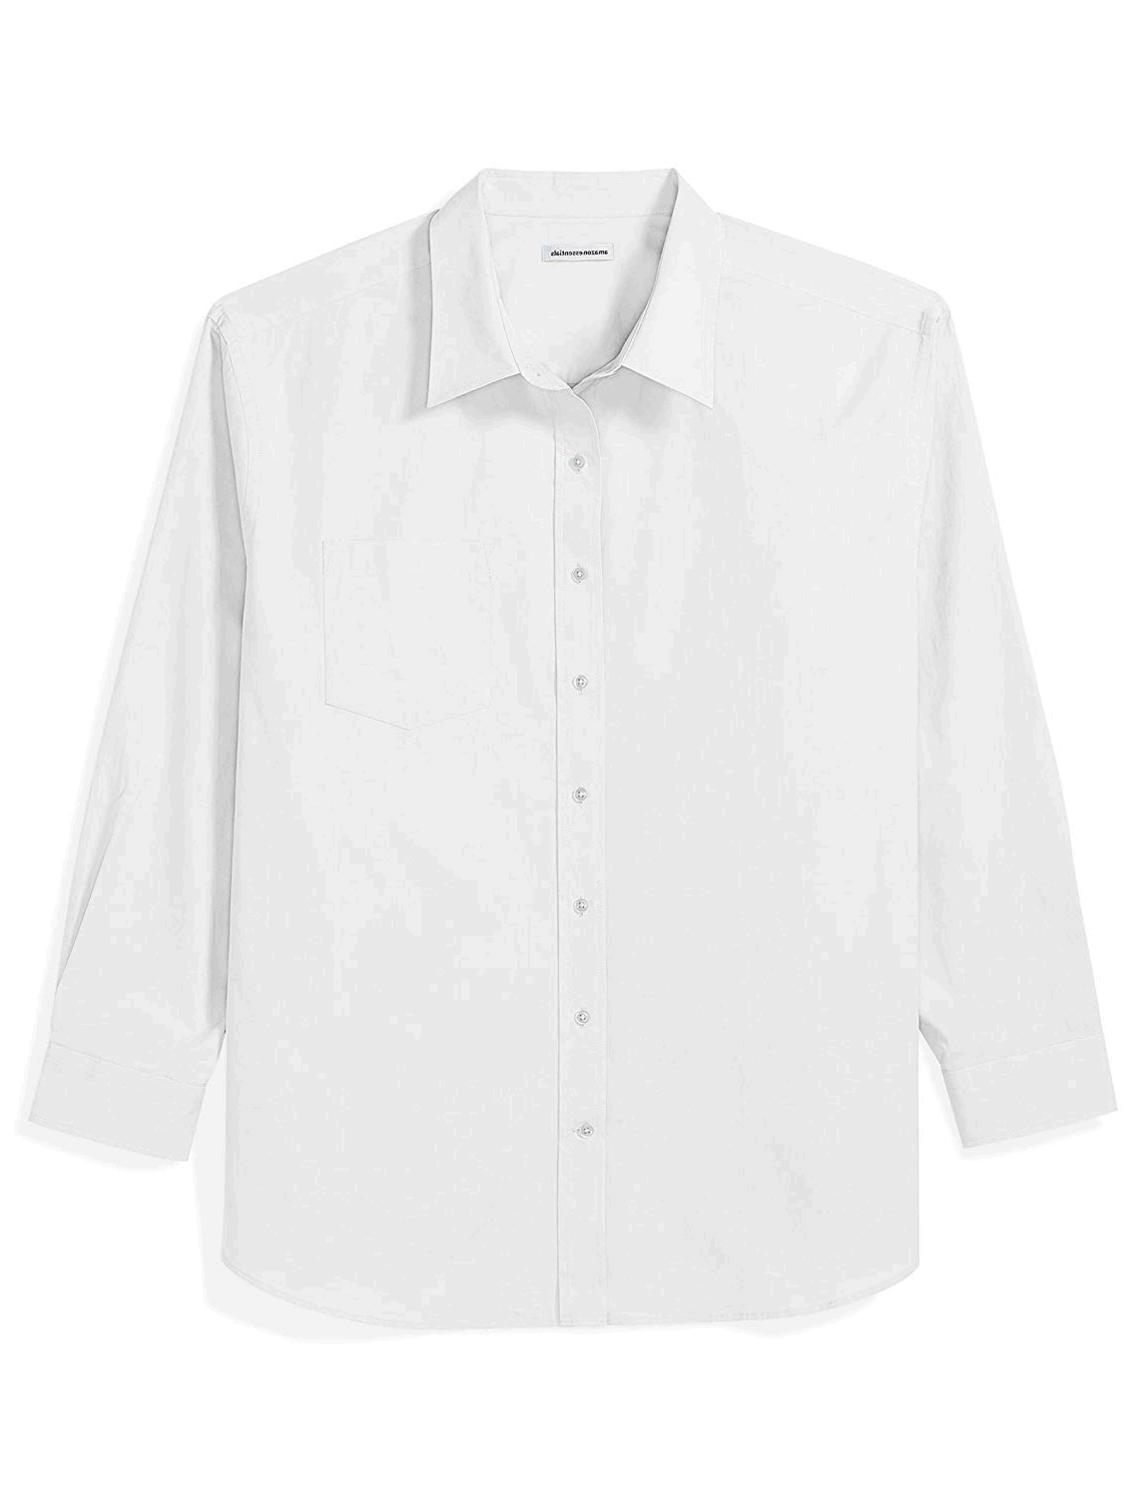 Essentials Men's Big & Tall Long-Sleeve Solid Shirt fit, White, Size 2. ...